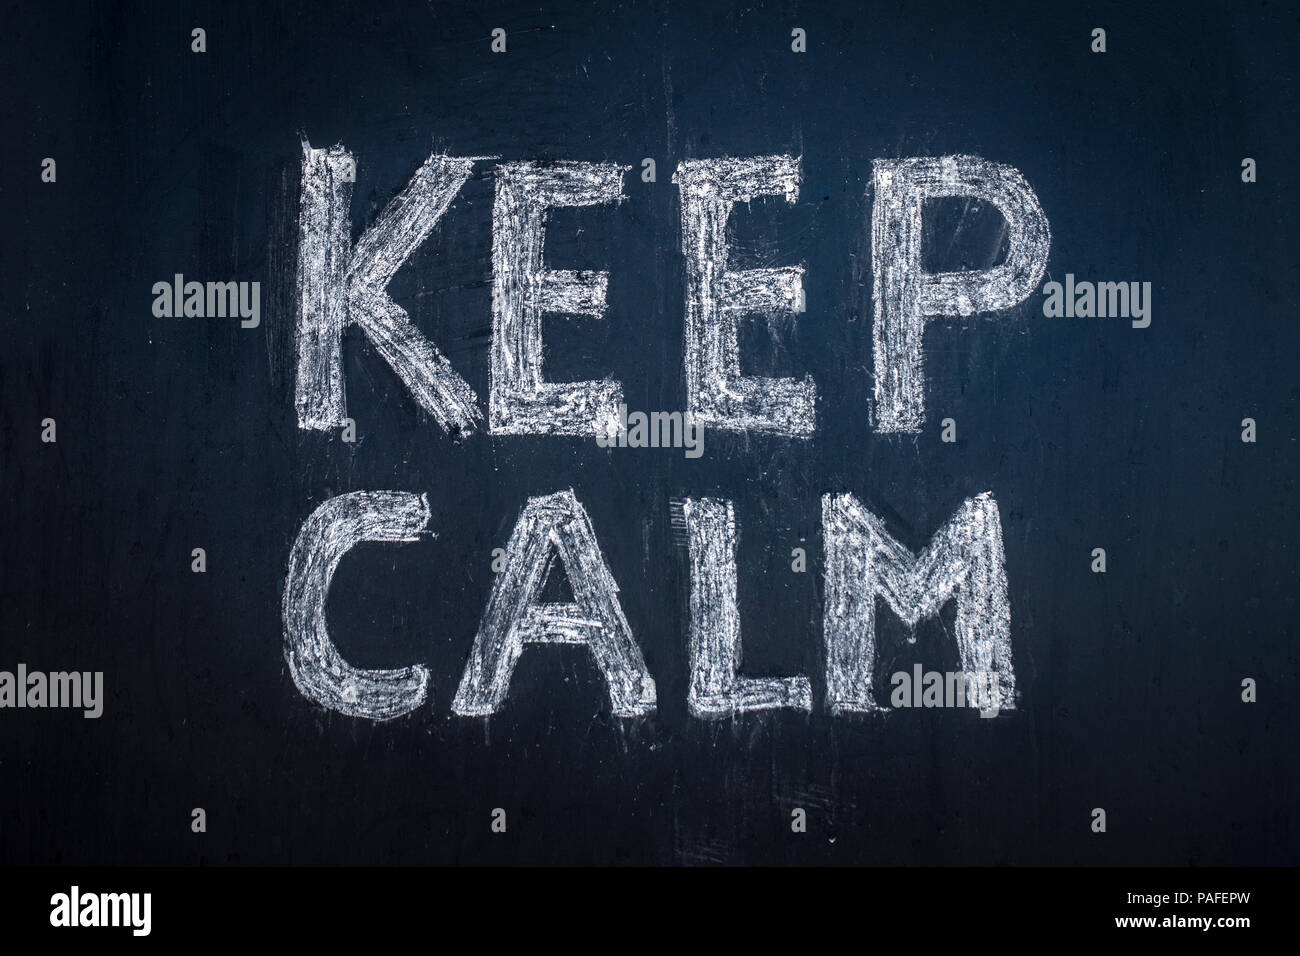 Text Keep calm written in chalk on a black board. Stock Photo